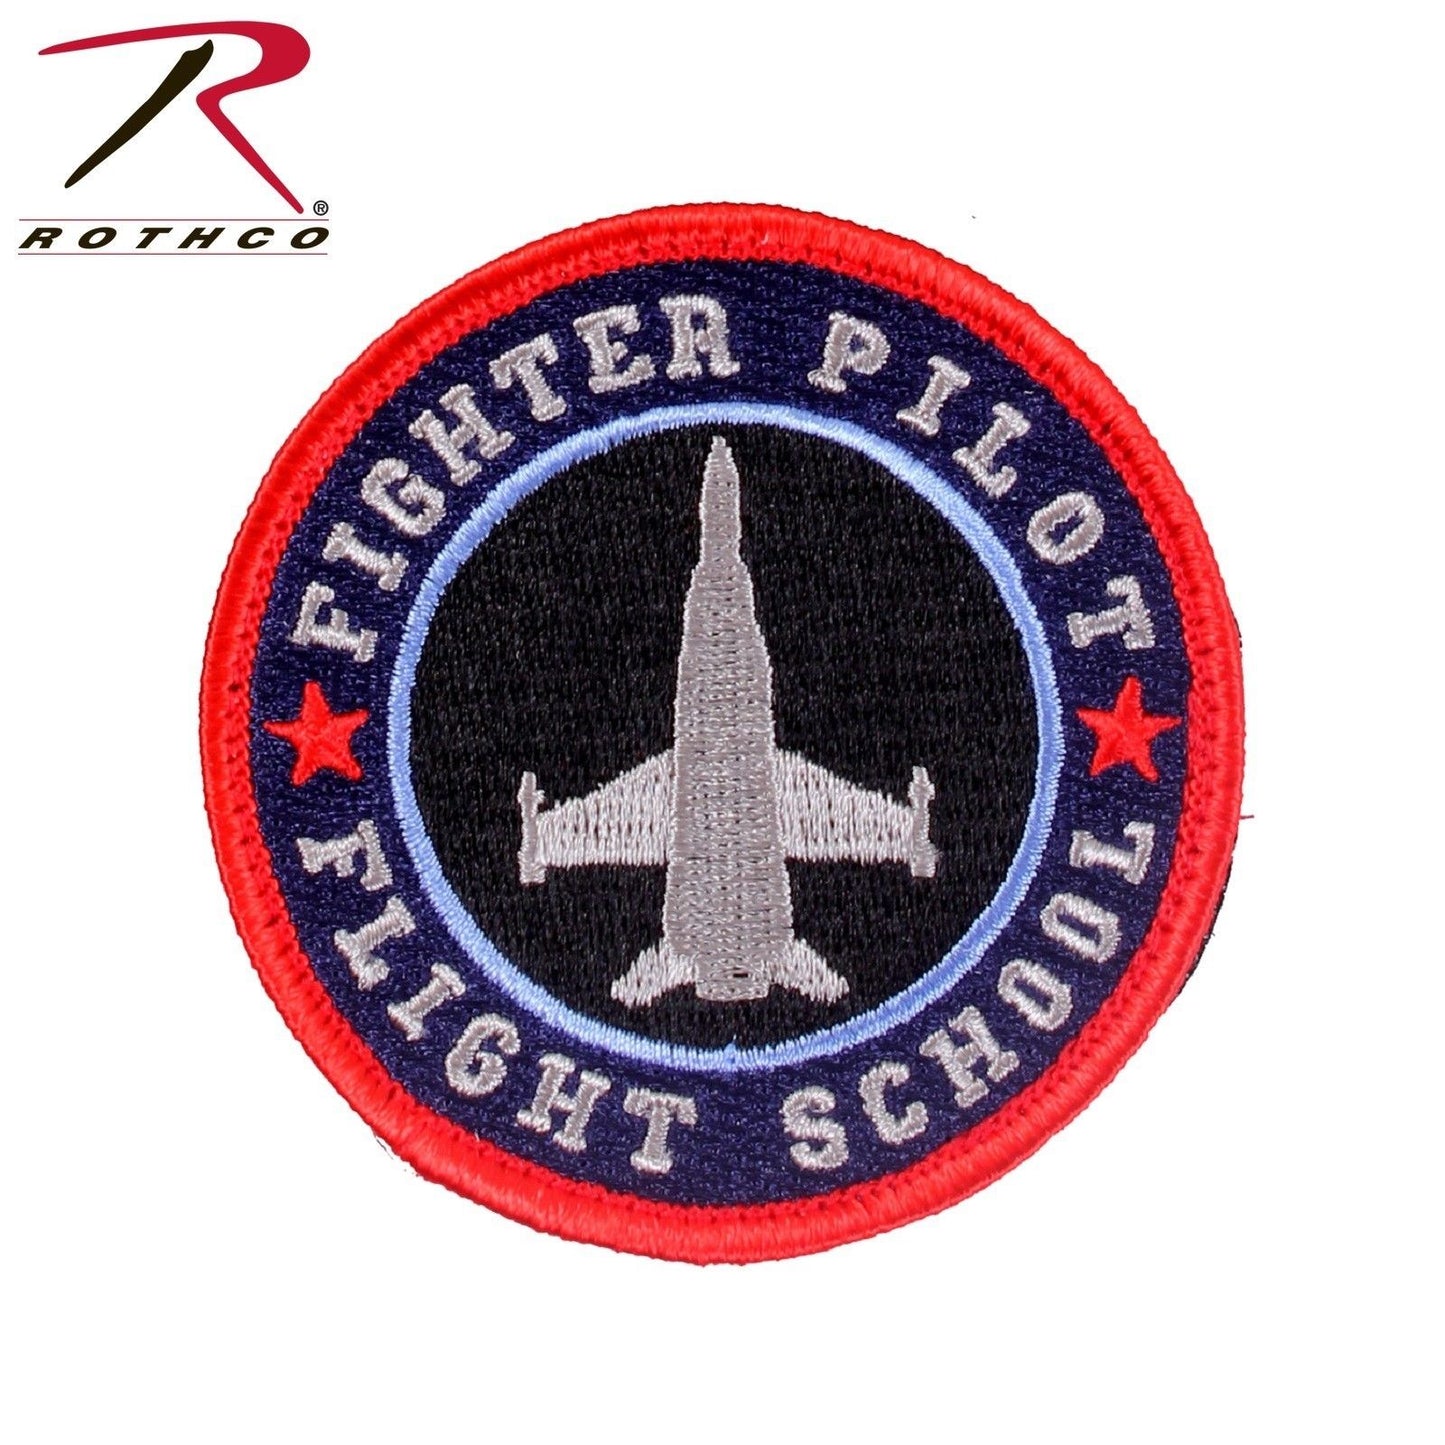 Rothco Fighter Pilot Morale Patch - 3" Round Hook & Loop Flight School Patch